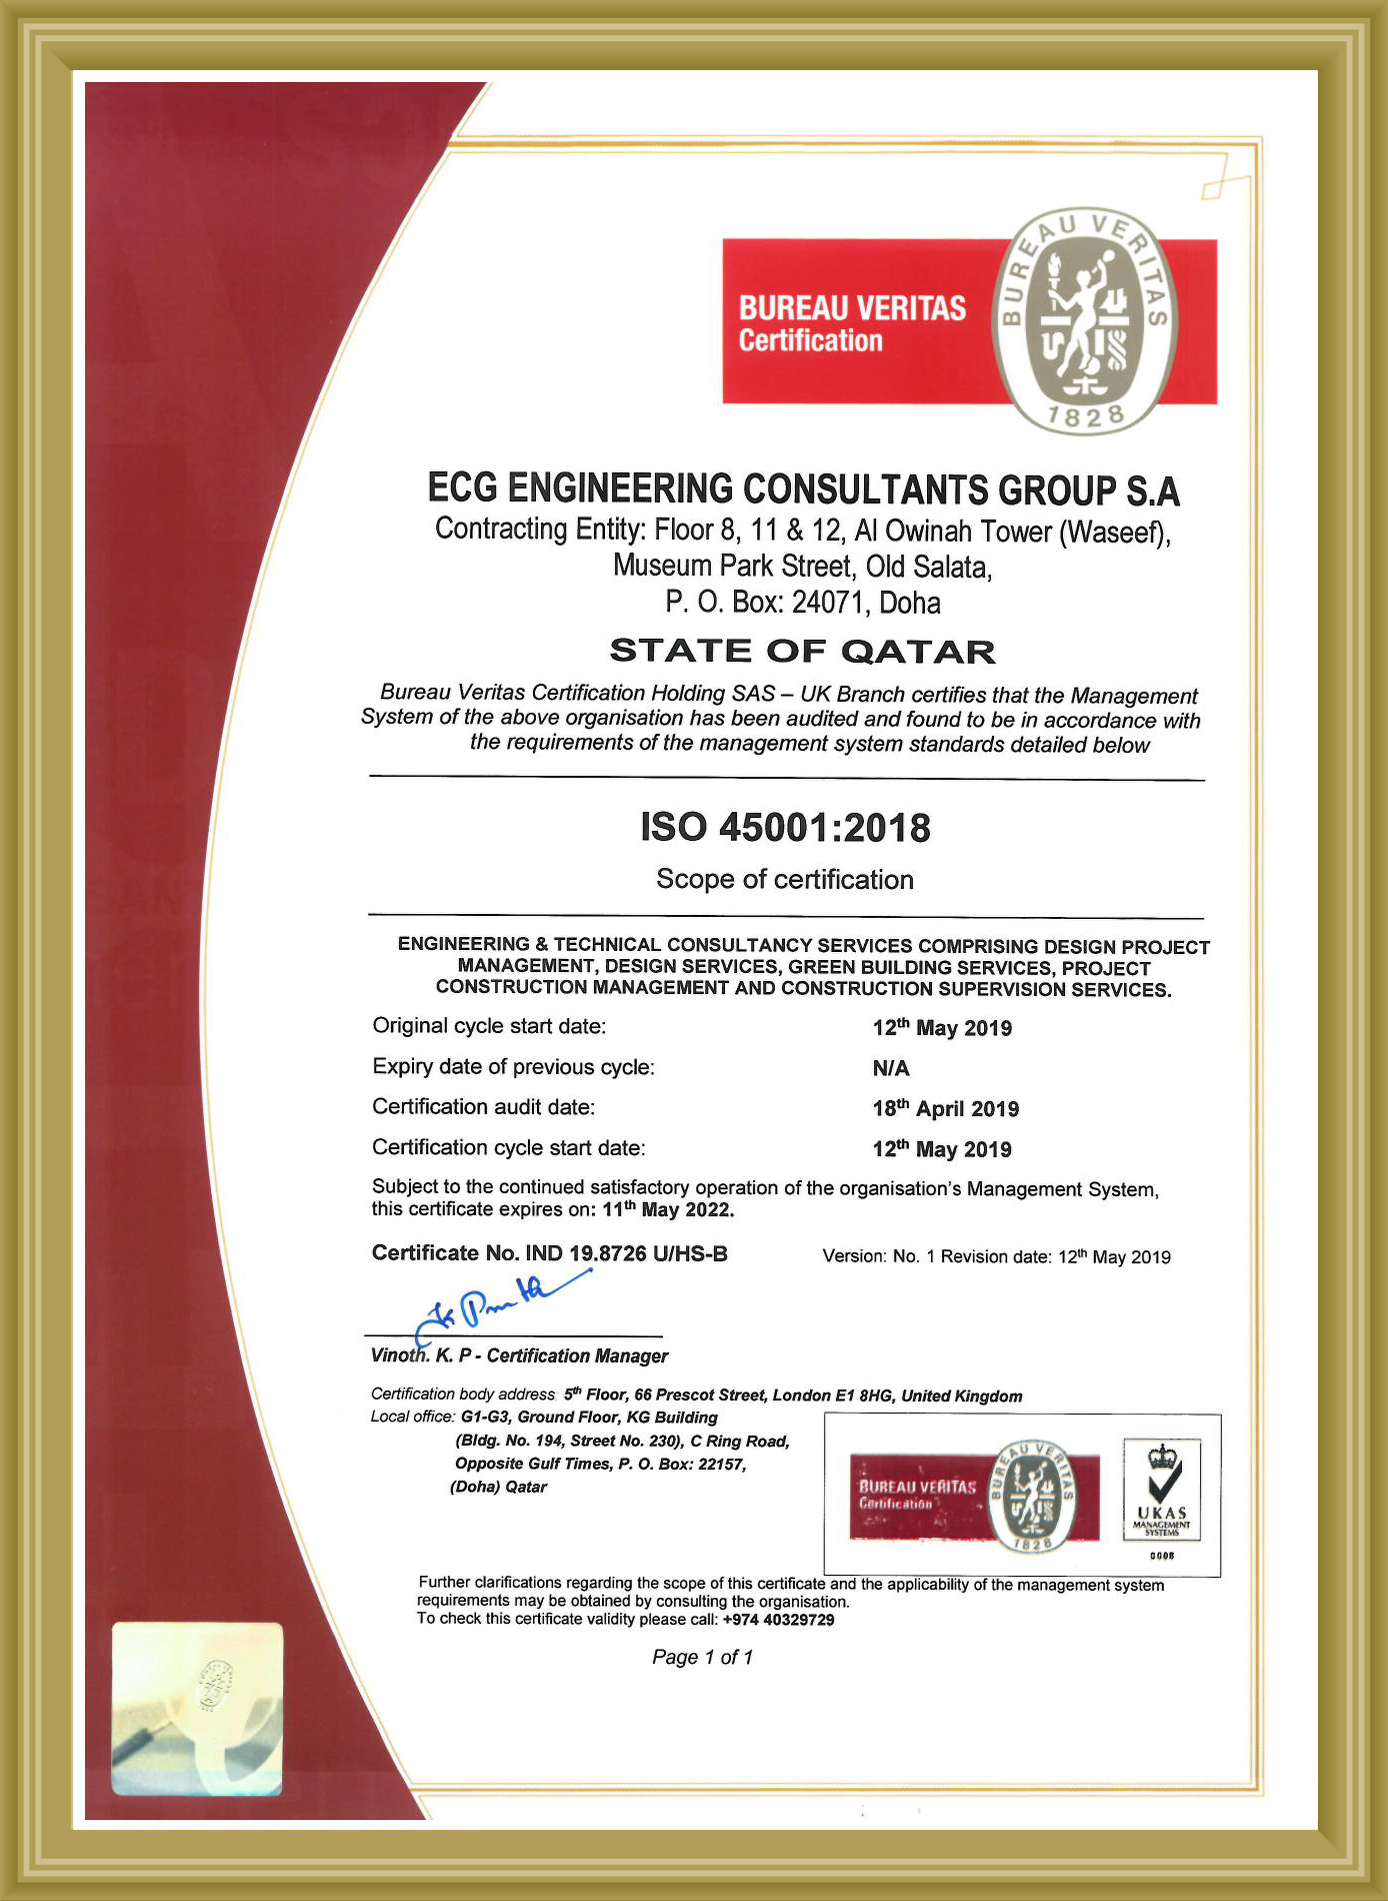 ISO QAT 45001 - 2018 Certificate - Safety